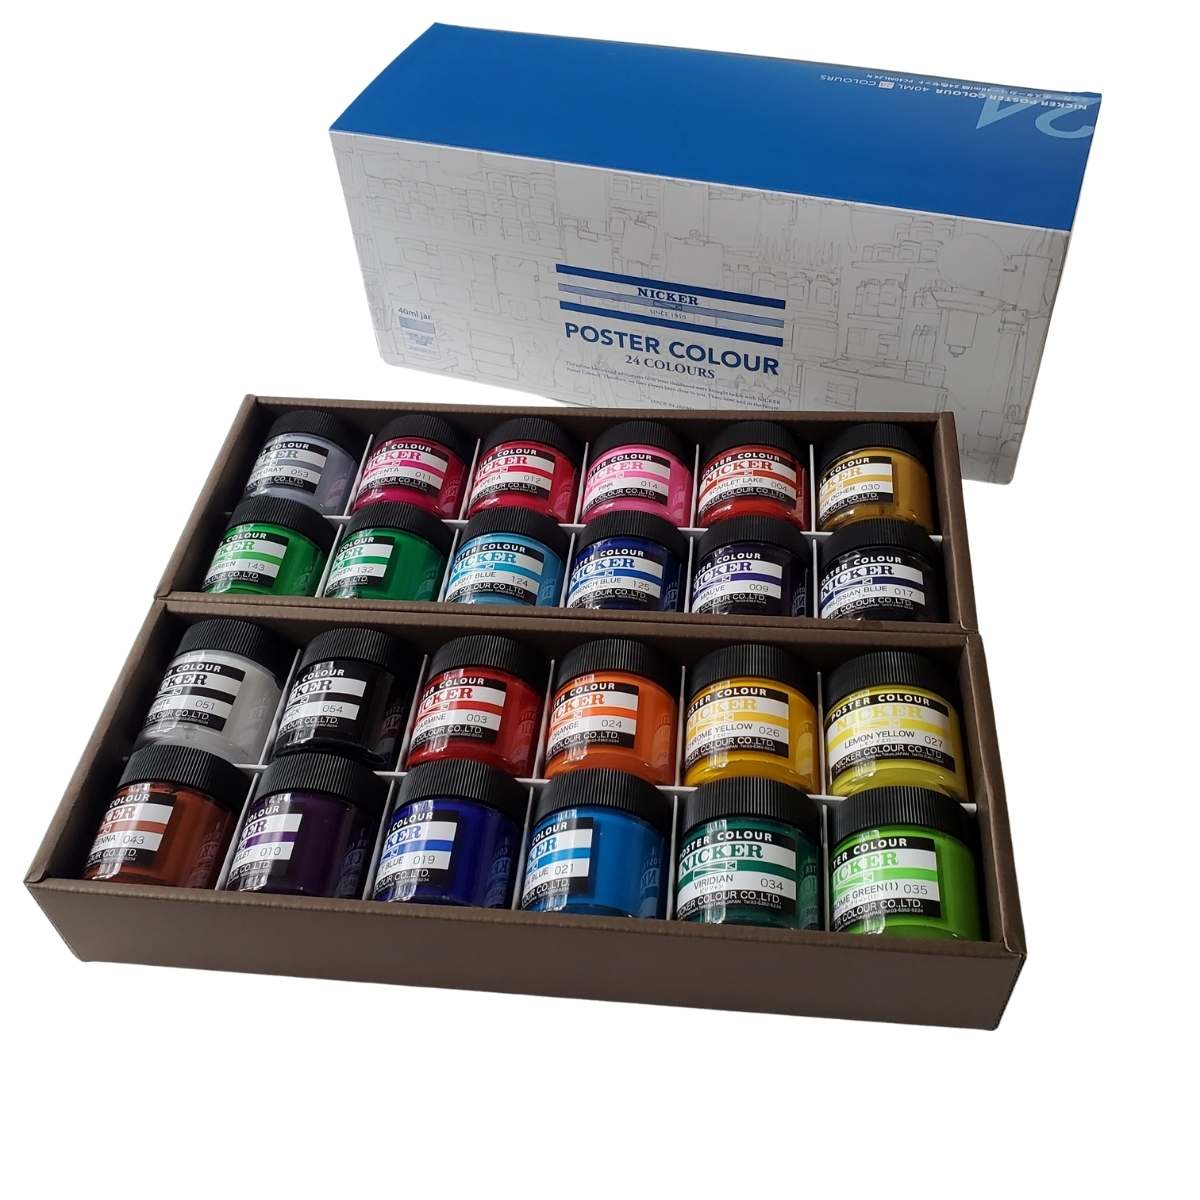 Load image into Gallery viewer, Nicker Colour Poster Paint Nicker - Poster Colours - Set of 24 Colours - 40mL Jars - Item #PC40ML24N
